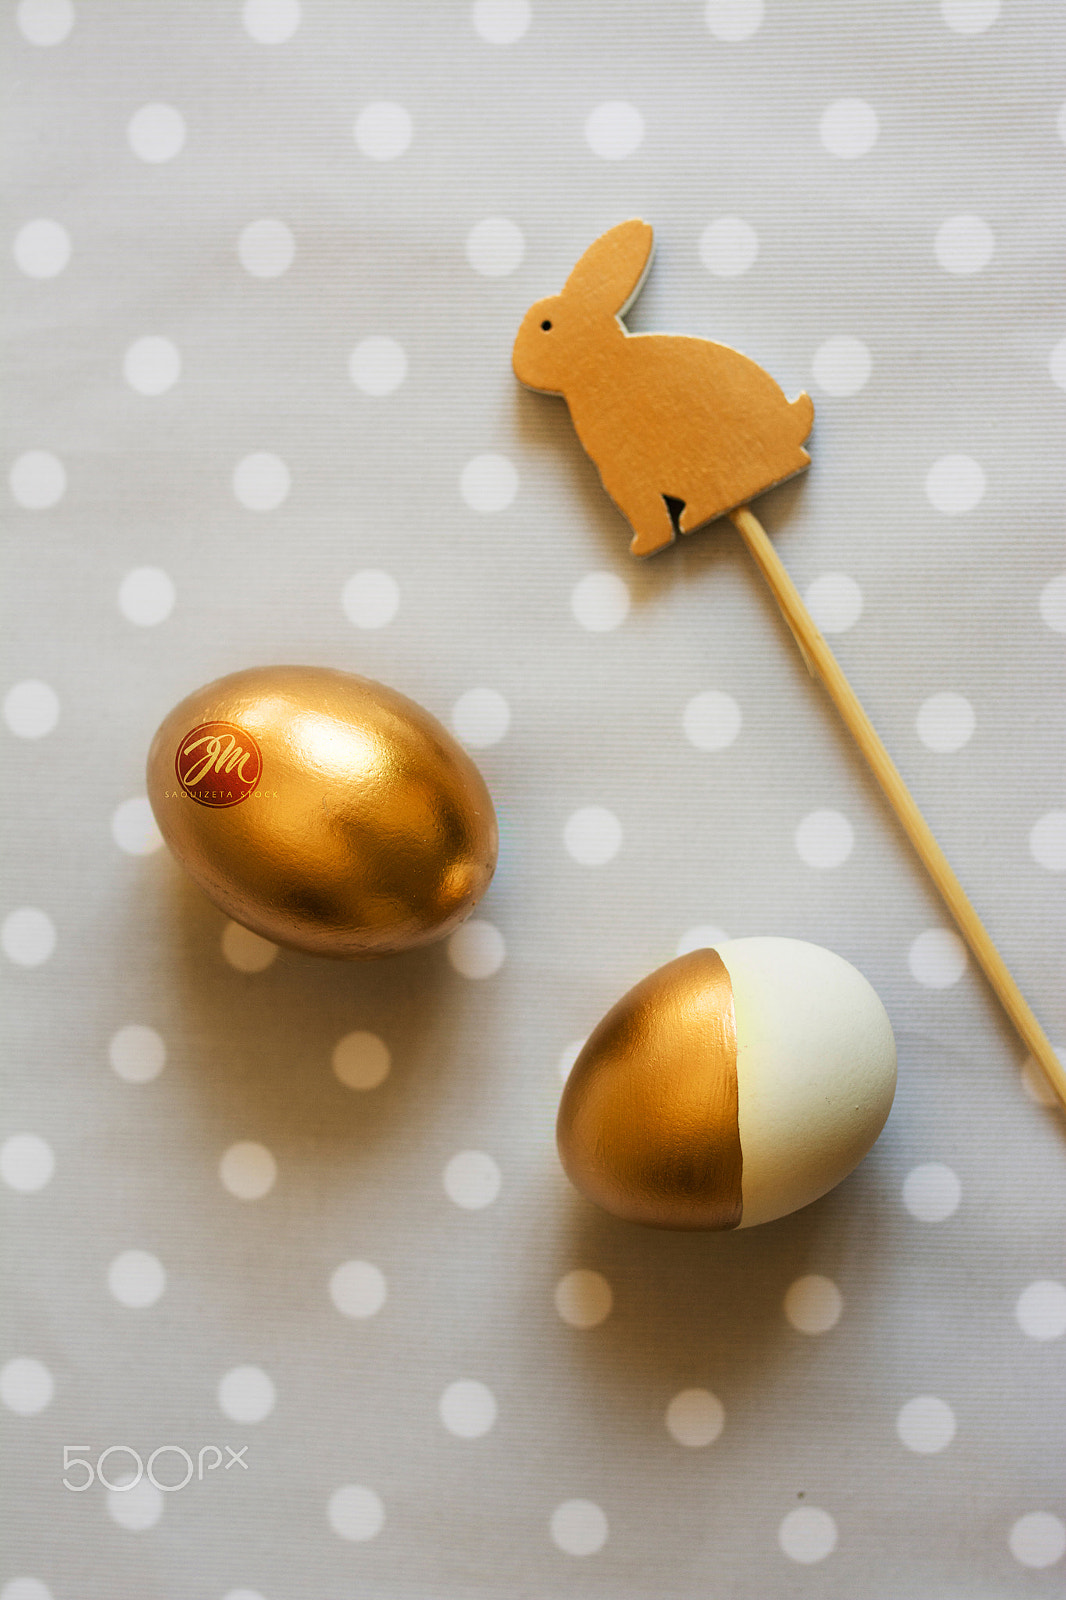 Nikon D7100 sample photo. Gold easter eggs and wood rabbit decorated, from above photography